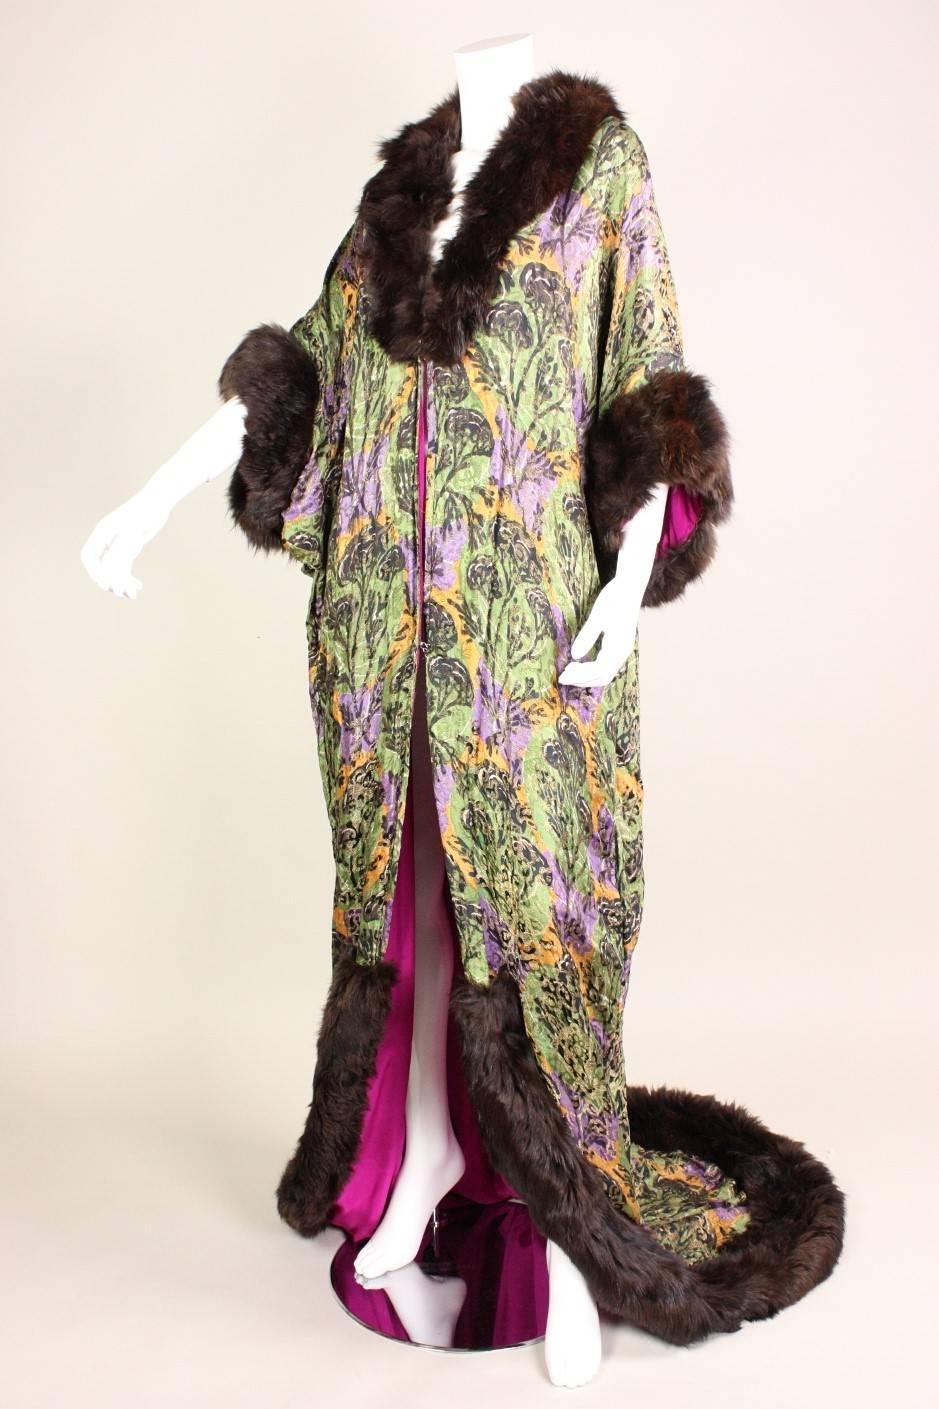 Vintage trained coat dates to the late Teens and is made of gorgeous gold lame fabric in tones of violet, orange, and green.  Luxurious dark brown fur trim at the collar, cuffs, and hem.  Fully lined.  Center front hook and eye closures.

Due to